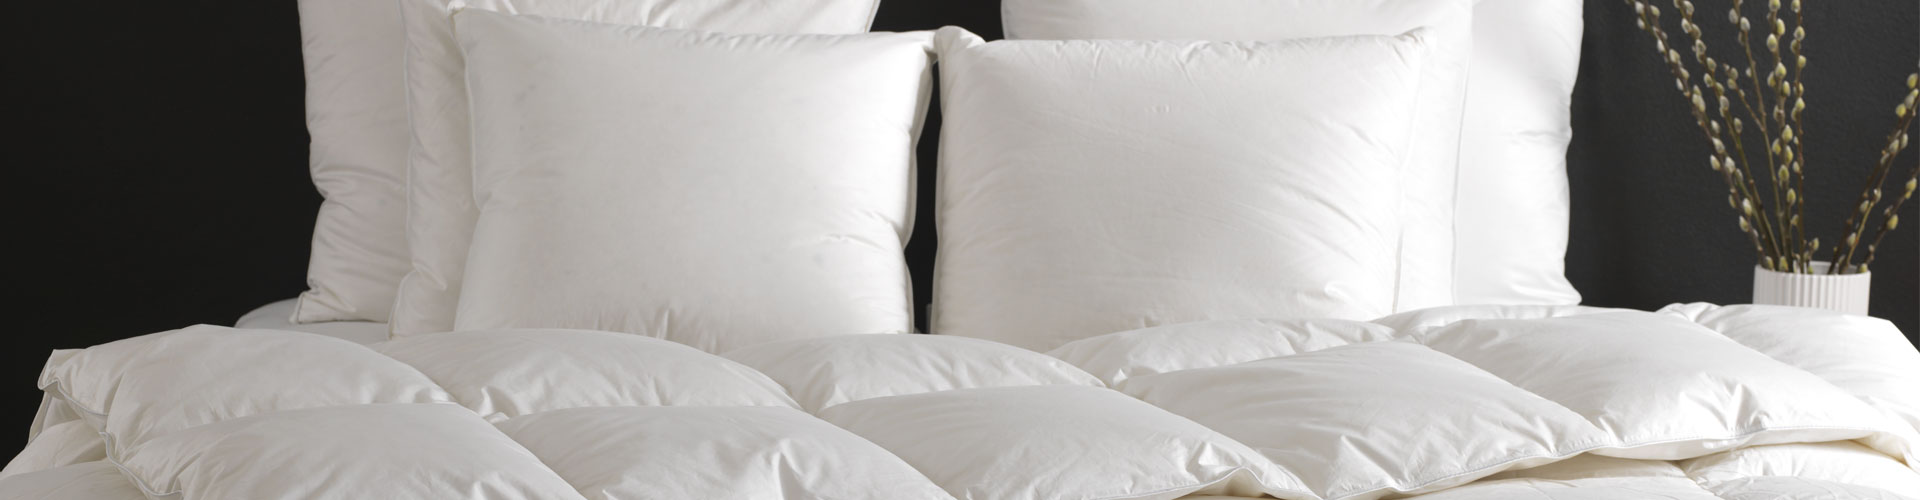 DYKON produce private label duvets and pillows